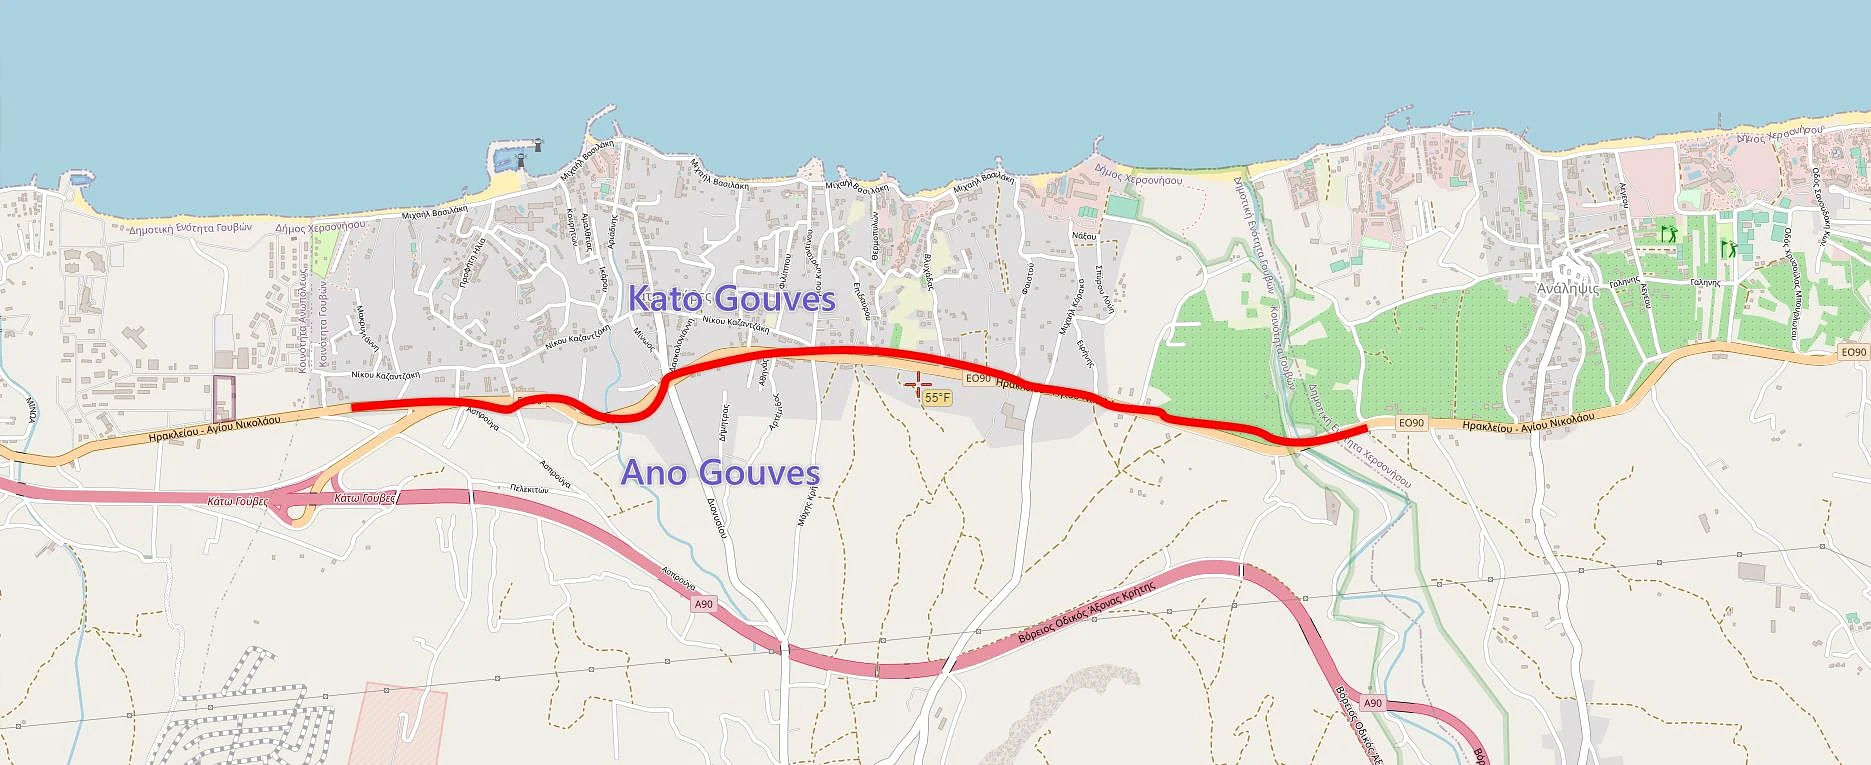 A map showing how the Kato Gouves and Ano Gouves are separated.